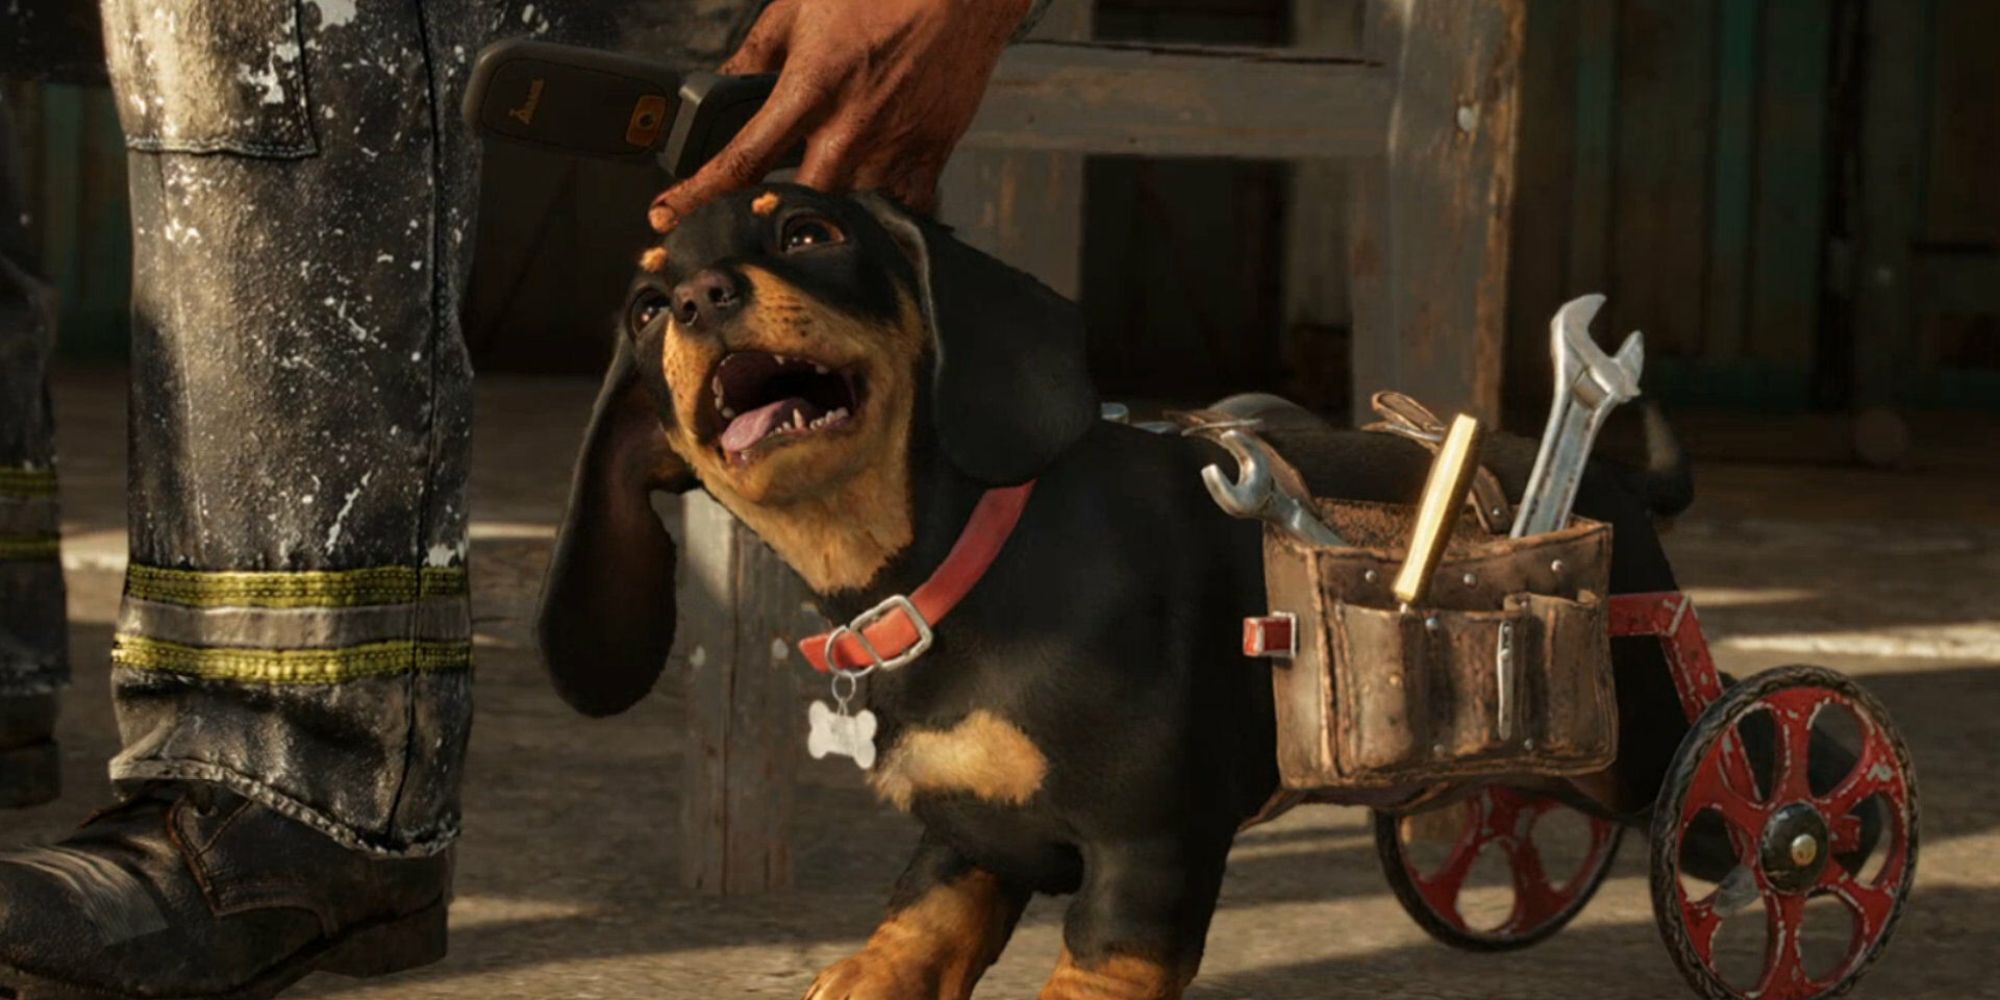 Small And Adorable Dark Puppy With Attached Wheels Carrying Tools In Far Cry 6